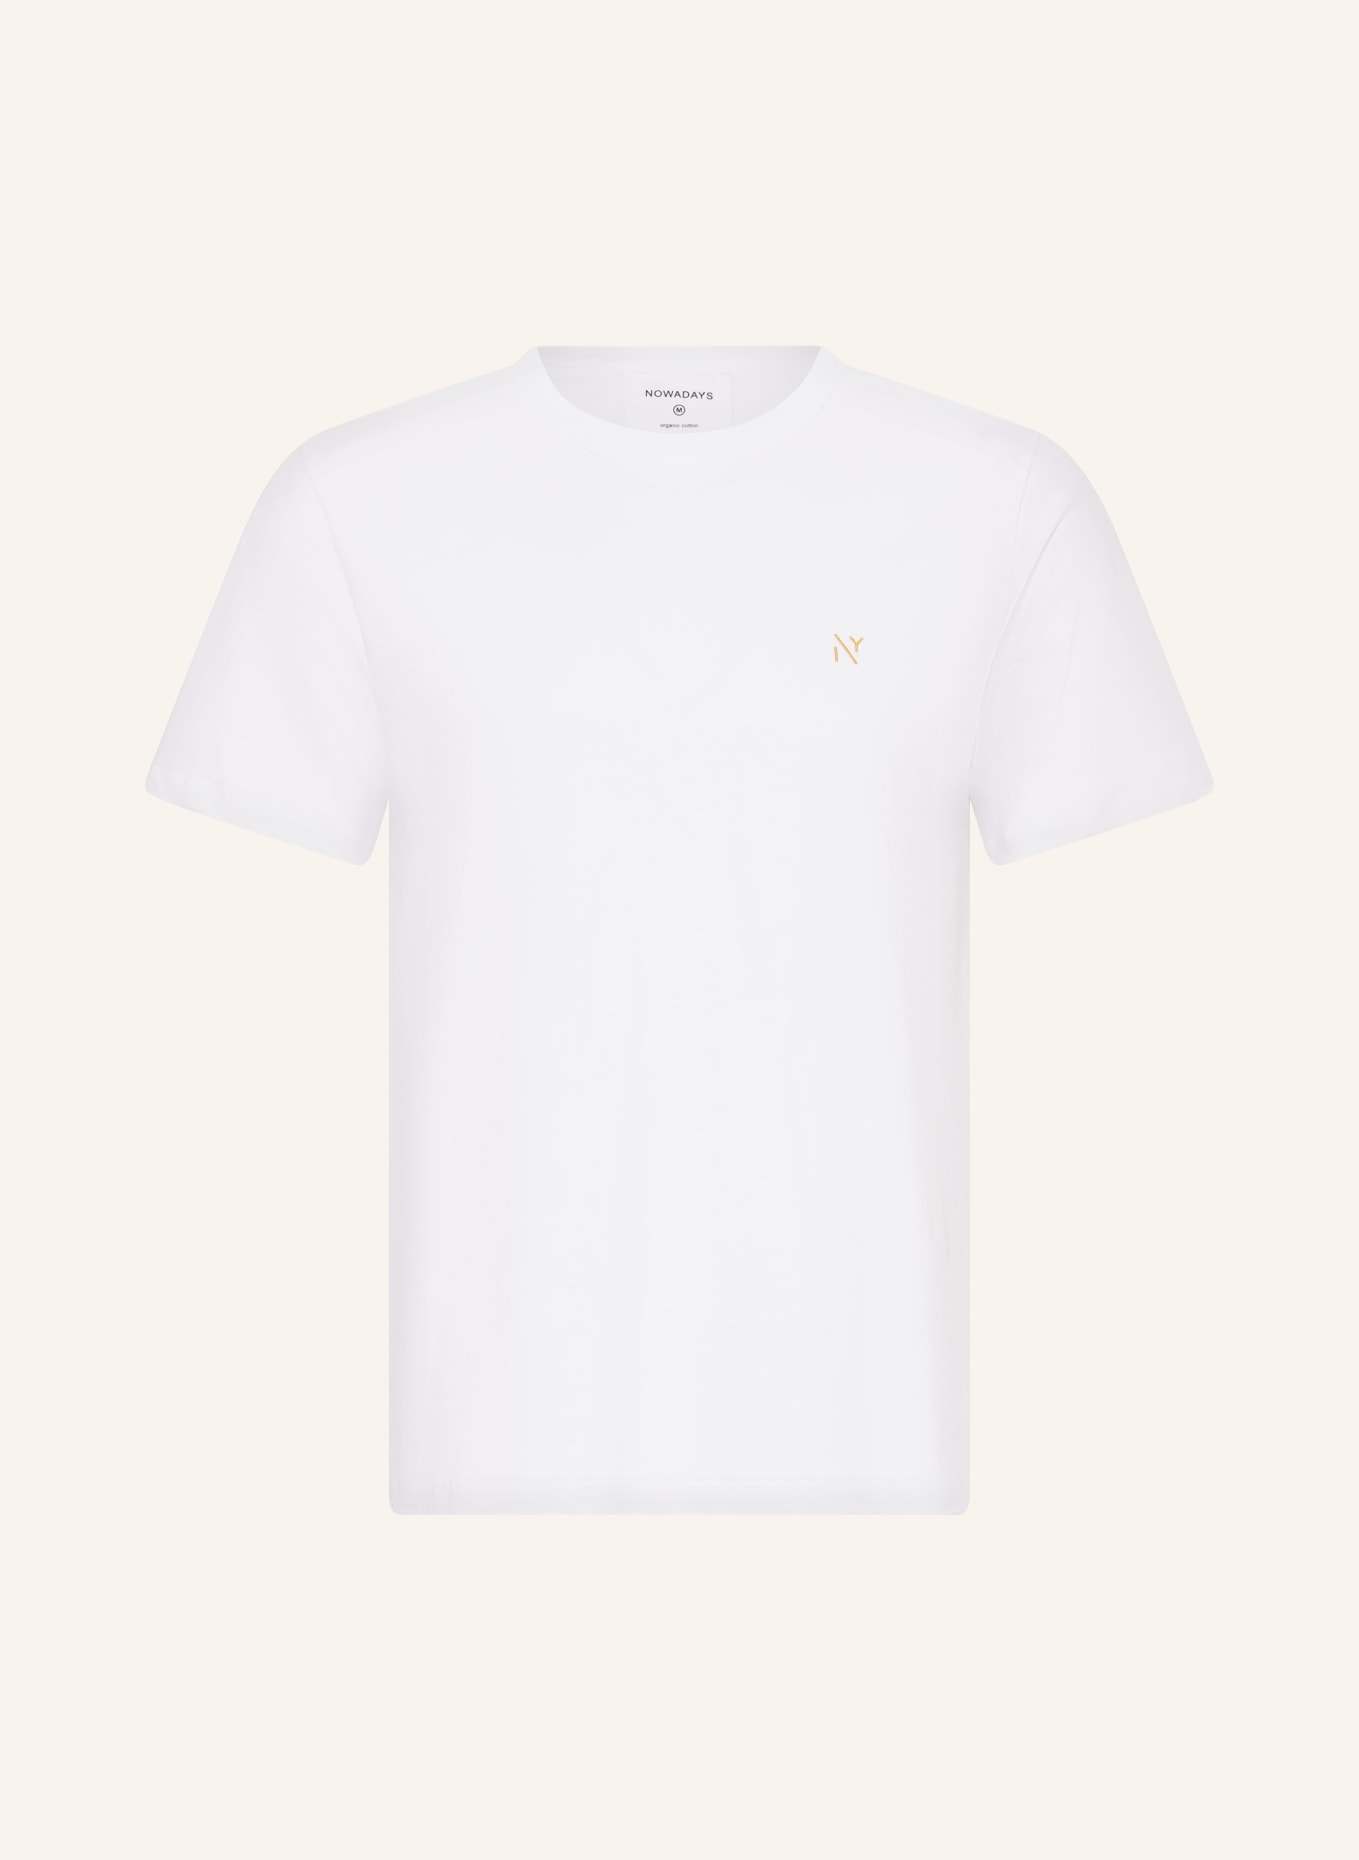 NOWADAYS T-shirt , Color: WHITE (Image 1)